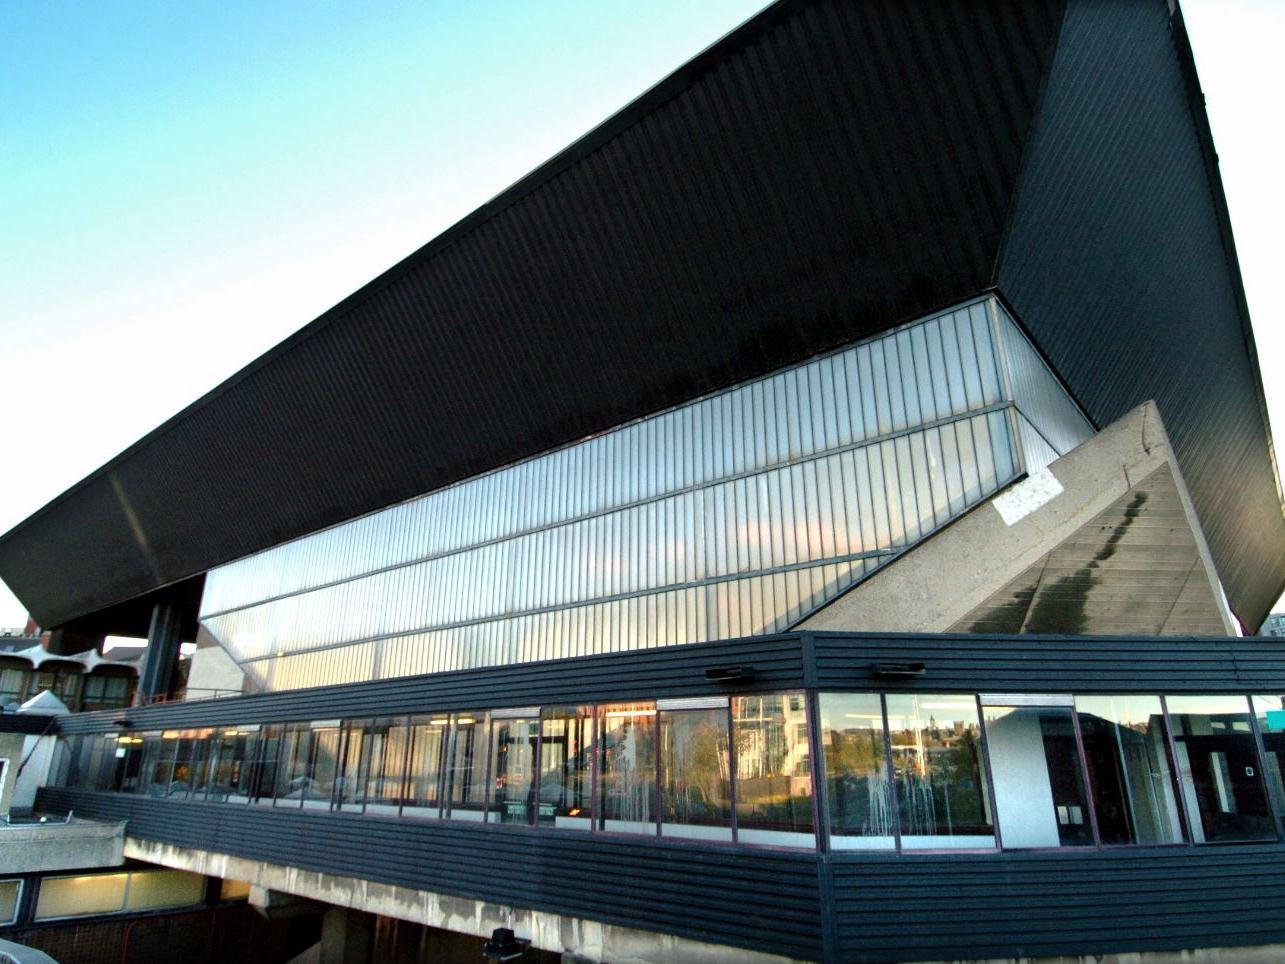 Leeds International Pool was iconic for its unusual architecture, but it welcomed many dedicated swimmers and divers through its doors until its closure in 2007.